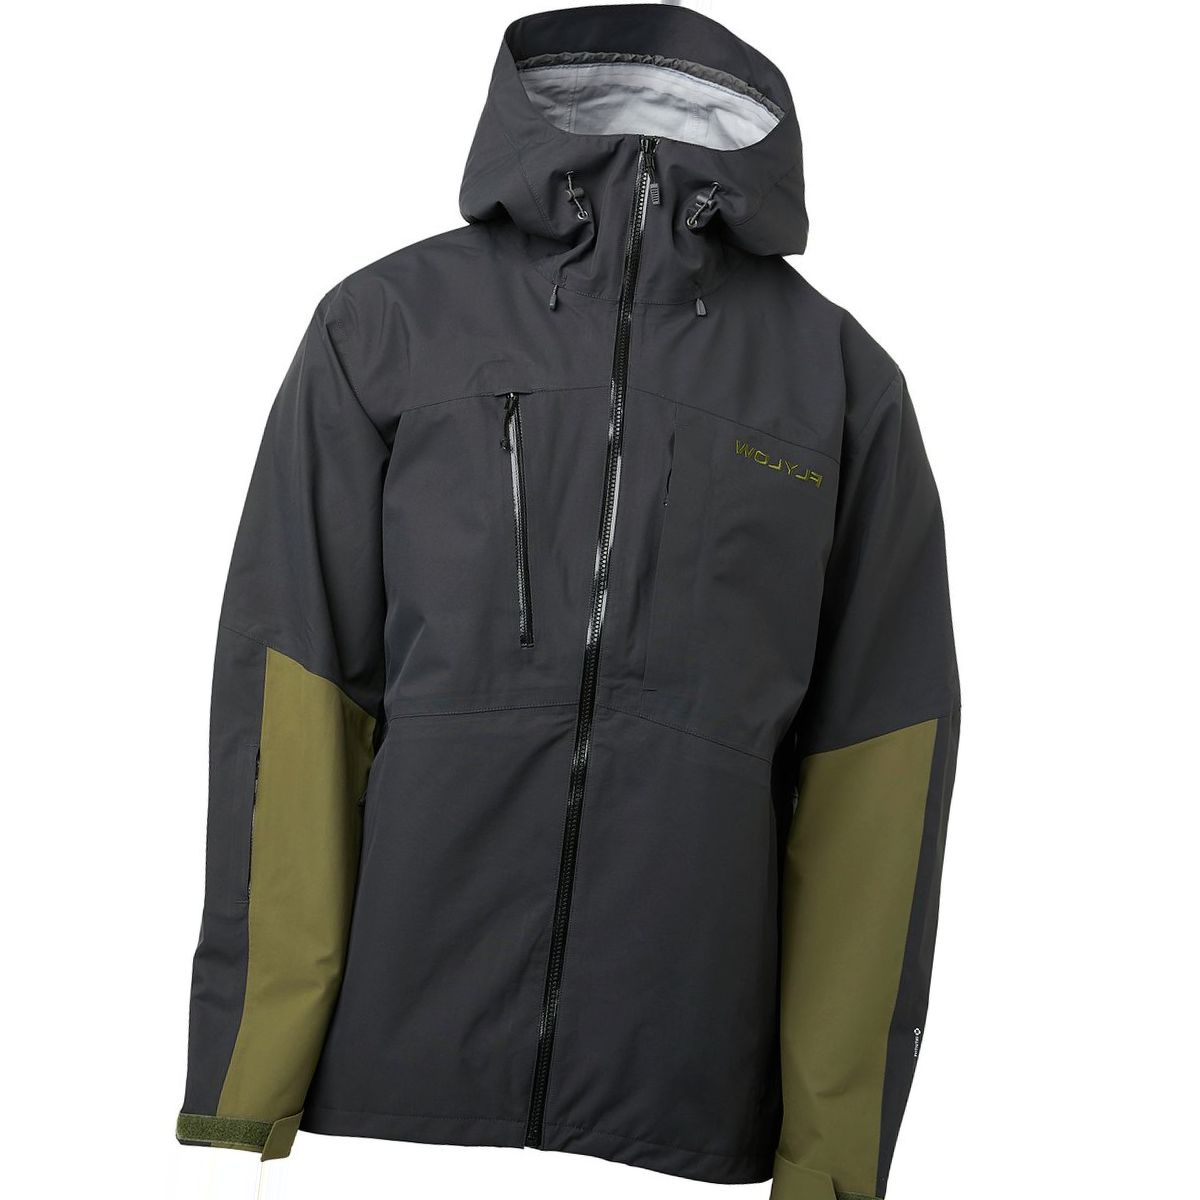 Top ofthe men's ski equipment & wear for the best outdoor — Outdoormiks